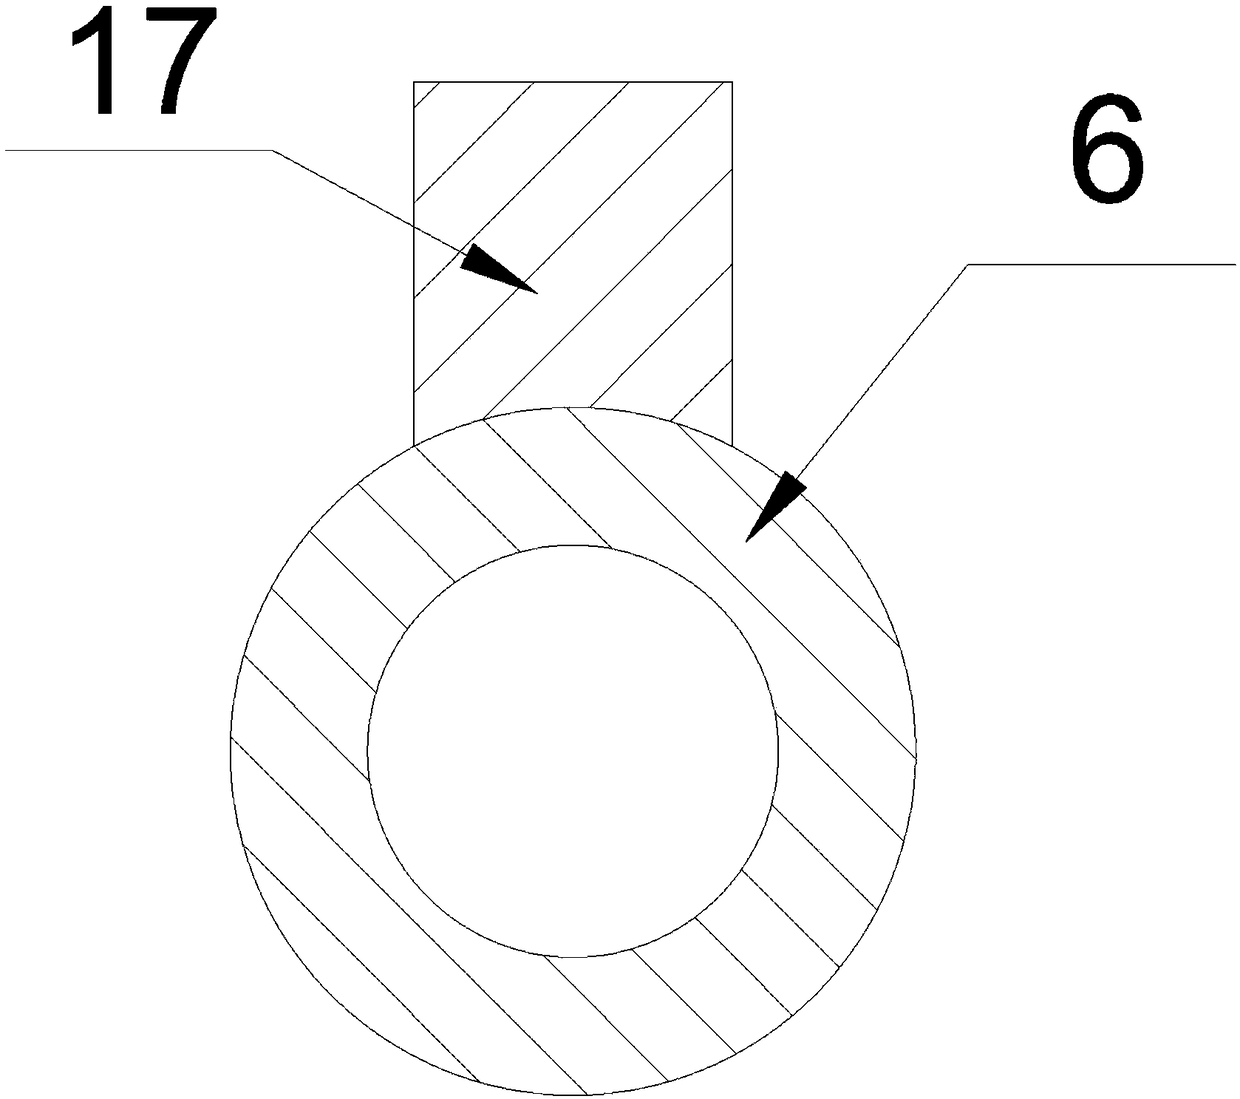 Hole grinding device